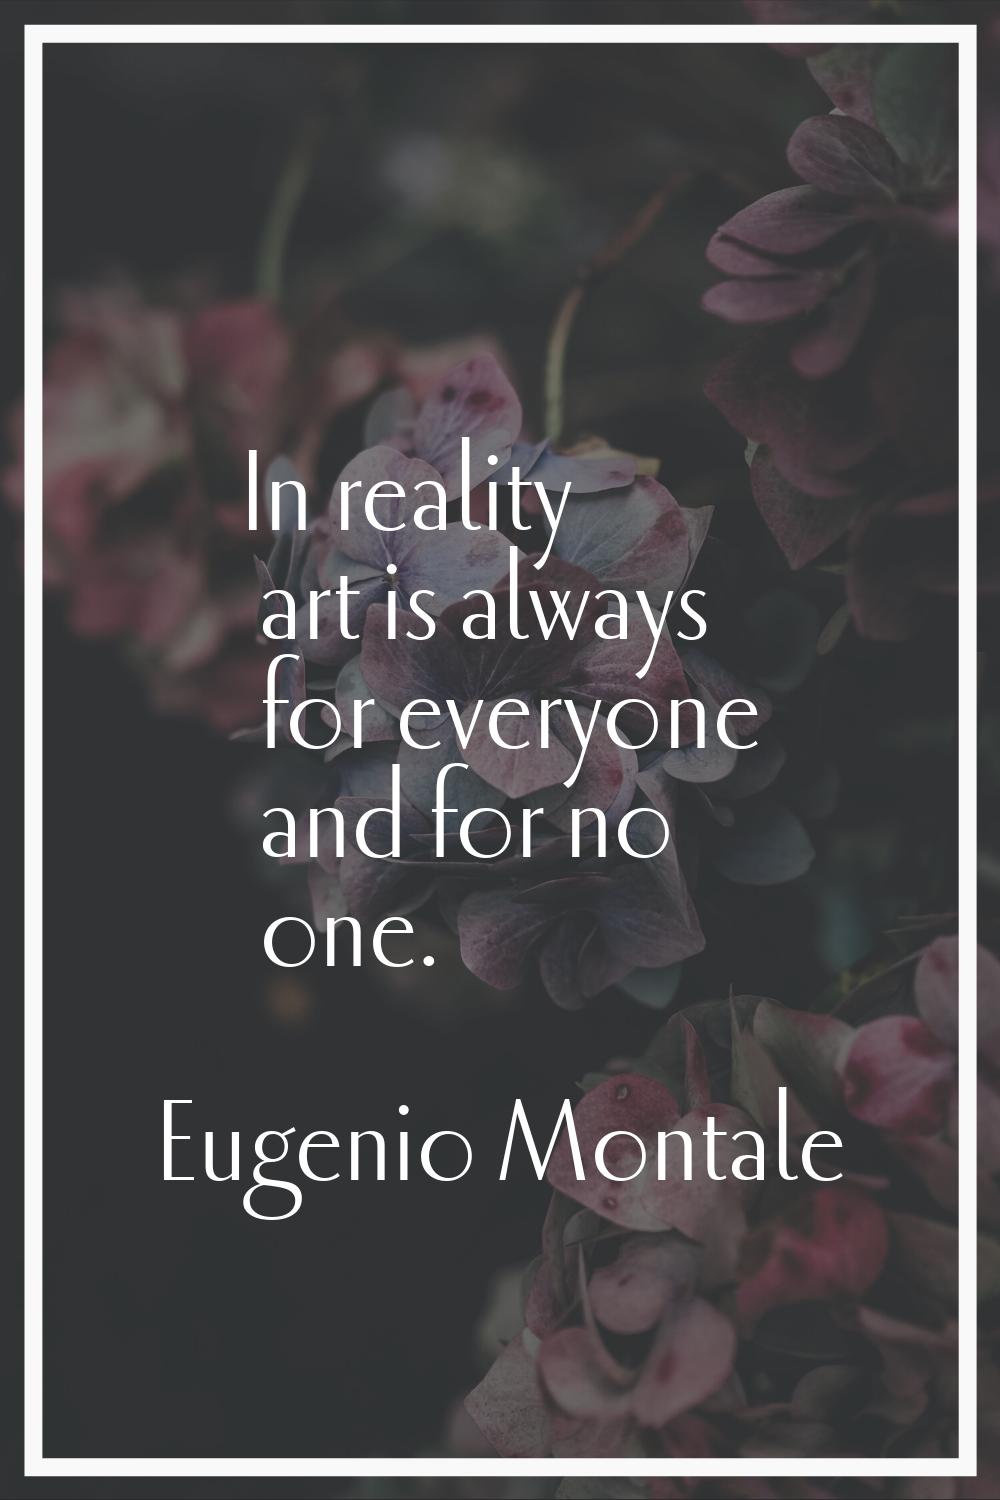 In reality art is always for everyone and for no one.